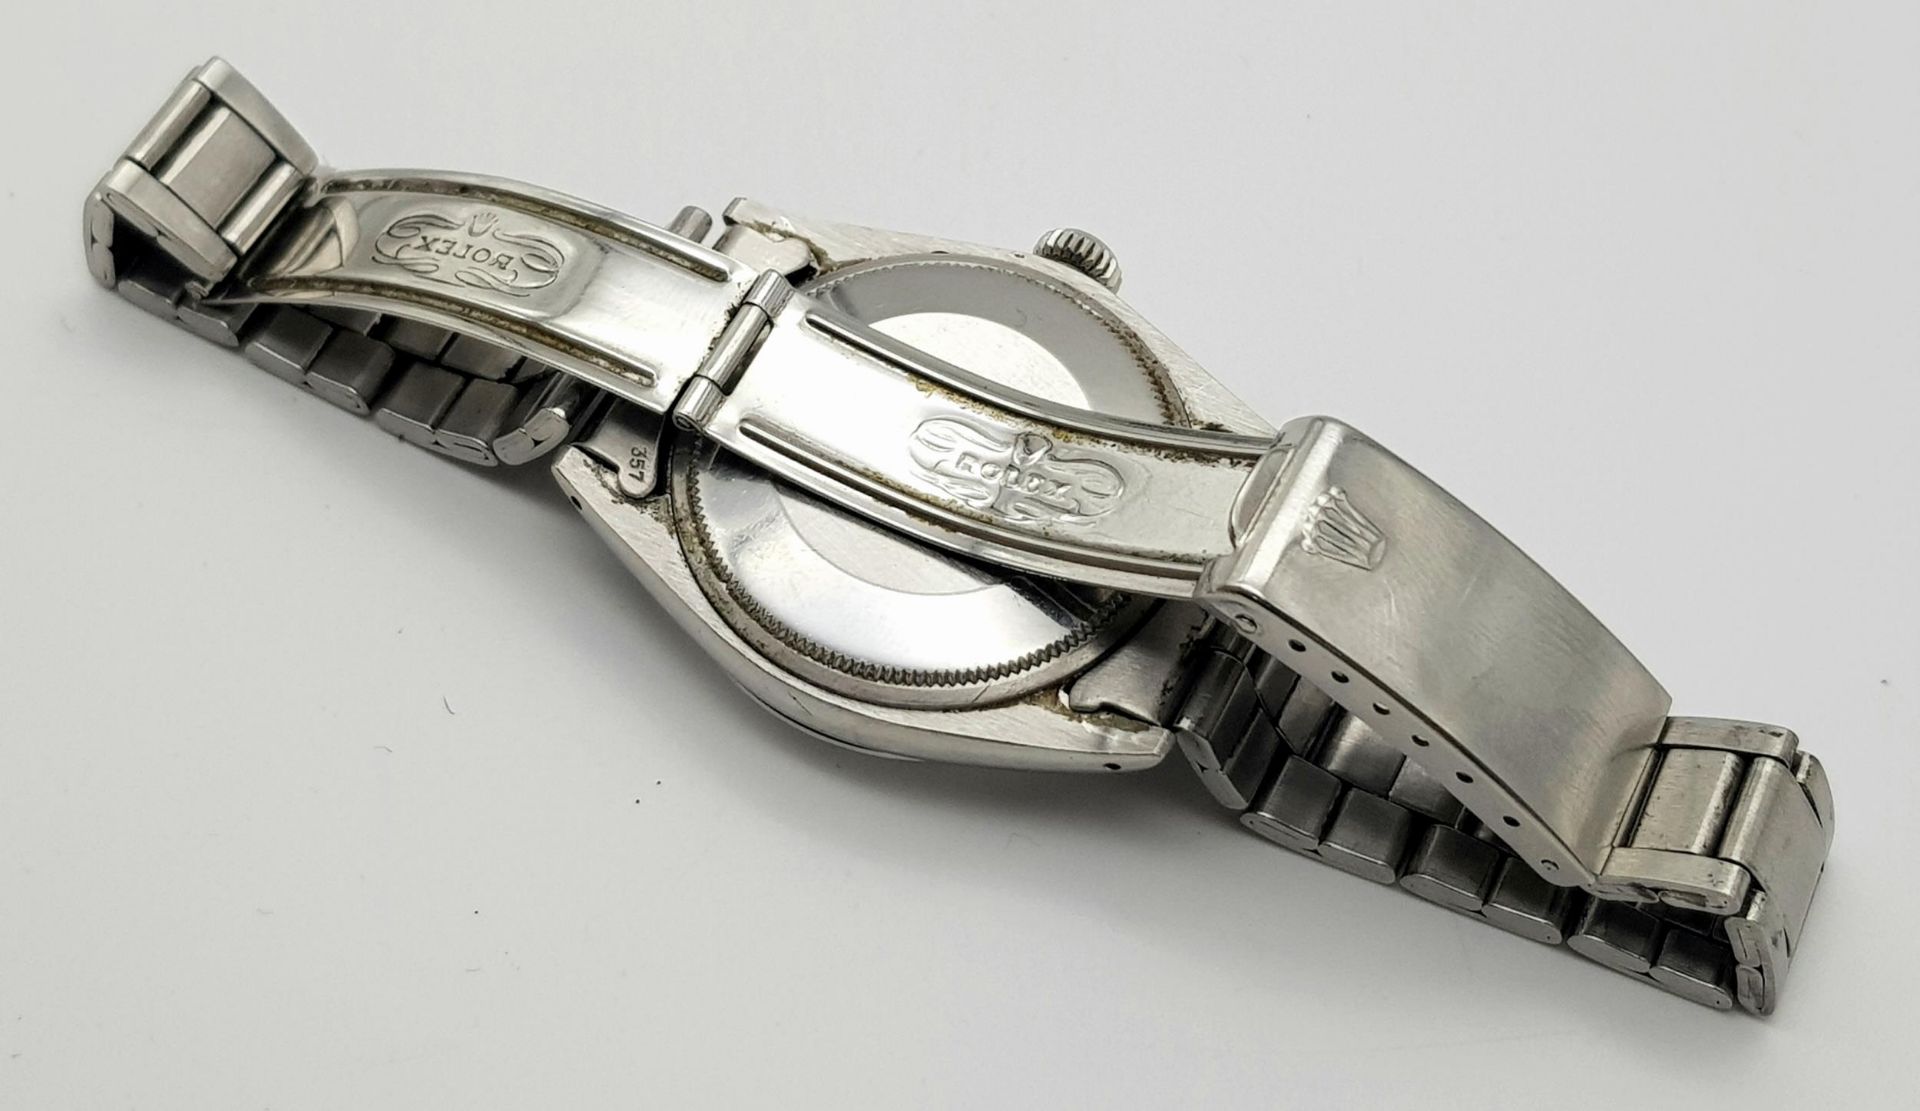 A Vintage Rolex Air King Mid Size Automatic Watch. Stainless steel bracelet and case - 35mm. - Image 8 of 8